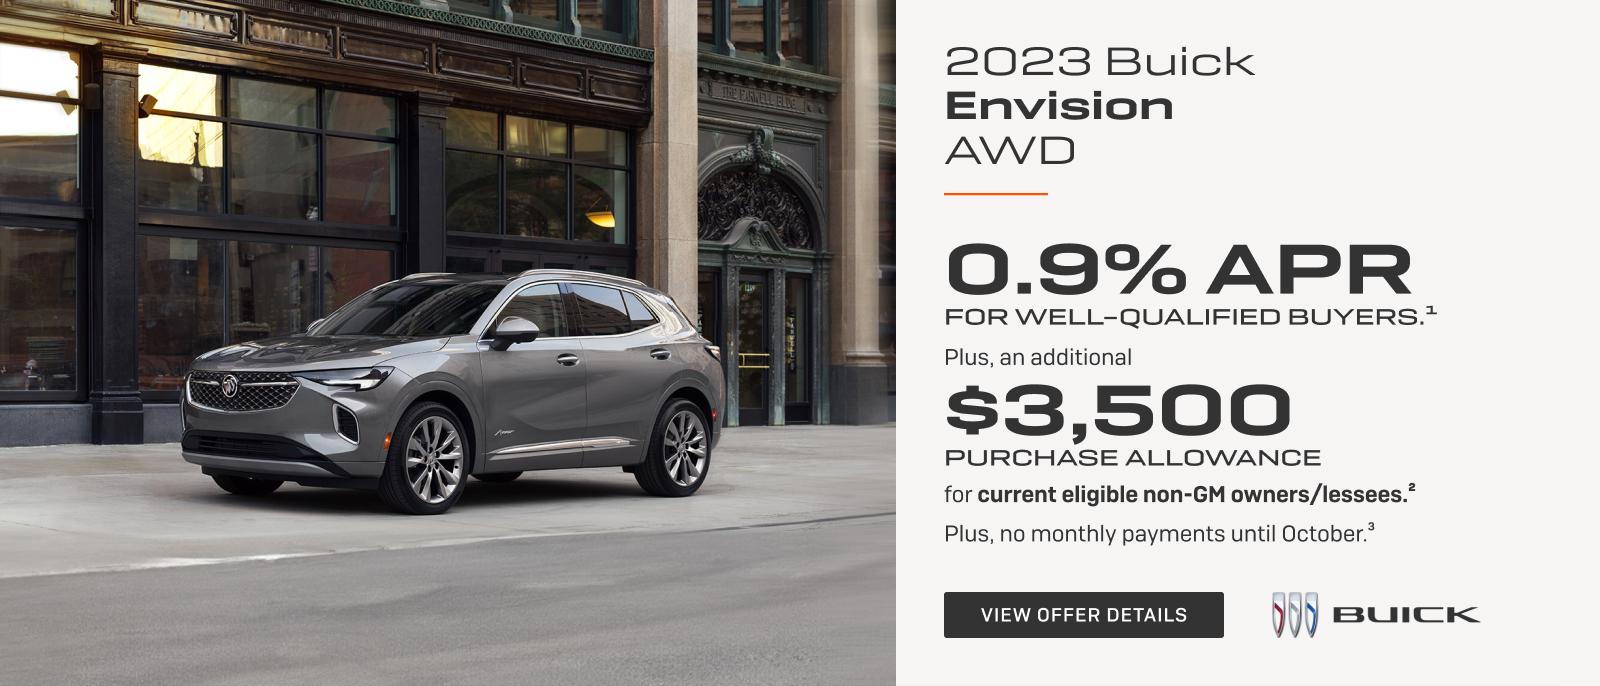 0.9% APR 
FOR WELL-QUALIFIED BUYERS.1

Plus, an additional $3,500 PURCHASE ALLOWANCE for current eligible non-GM owners/lessees.2

Plus, no monthly payments until October. 3